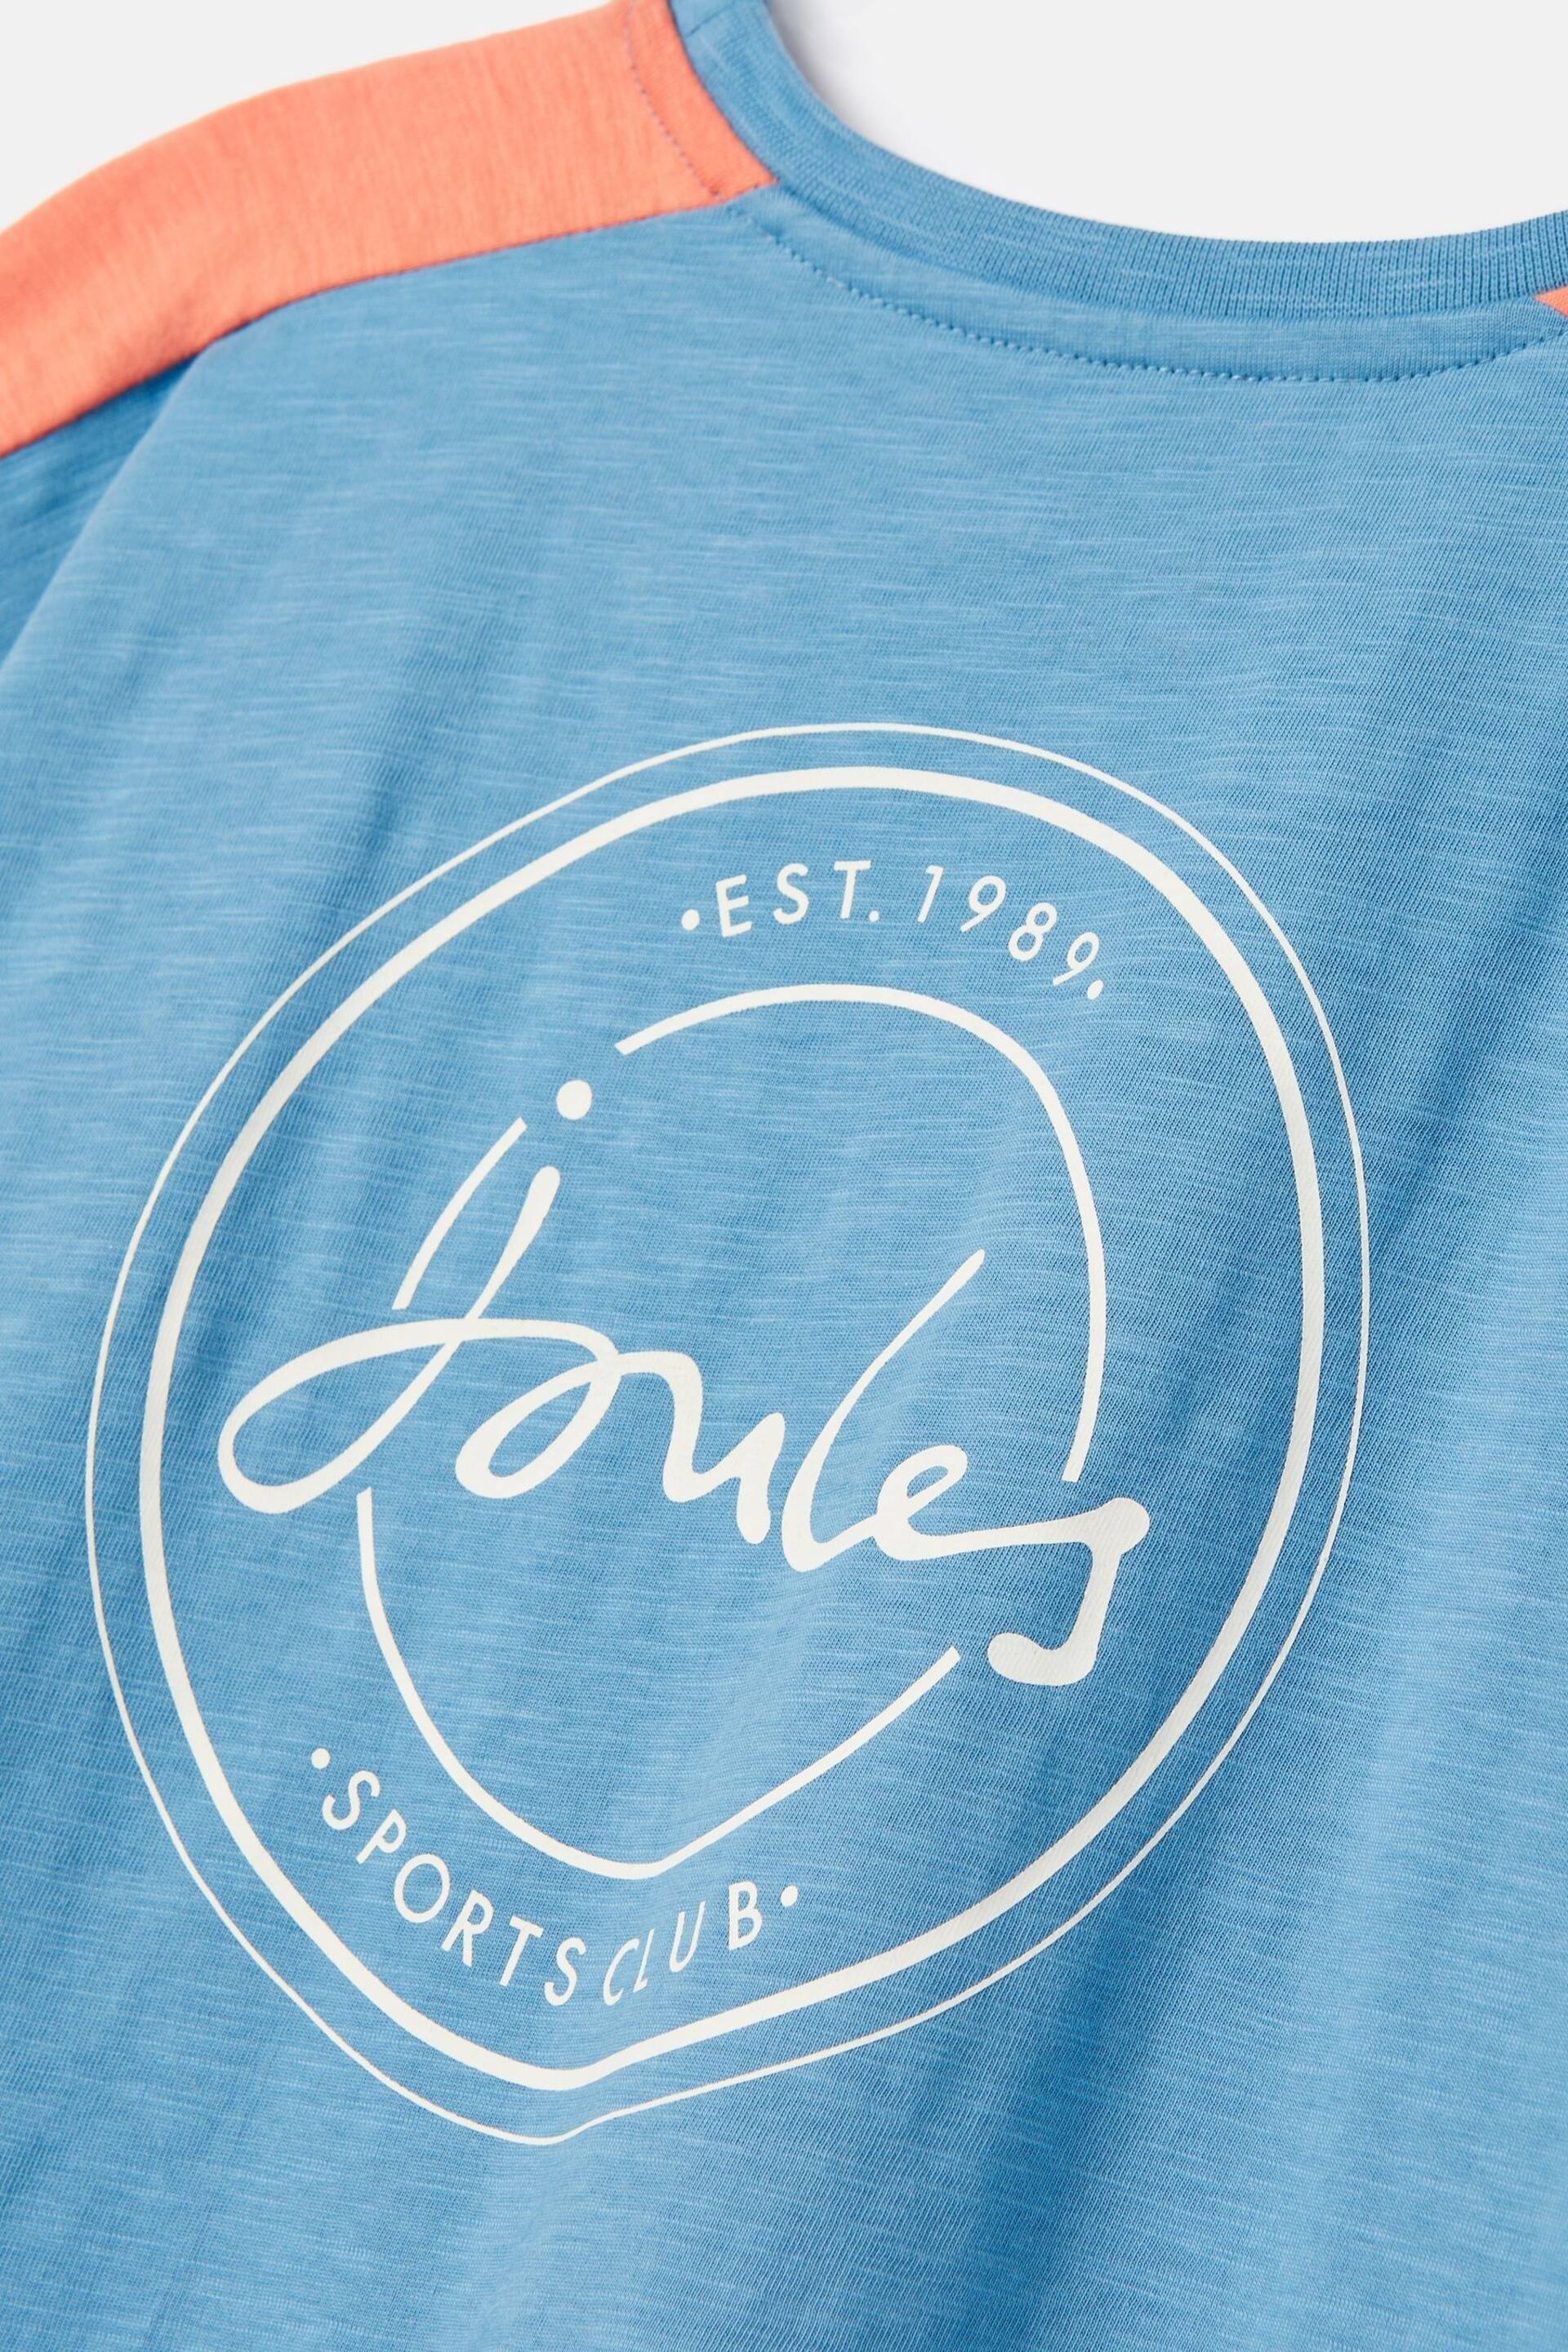 Joules Betty Blue Colour Block Short Sleeve T-Shirt - Image 3 of 5